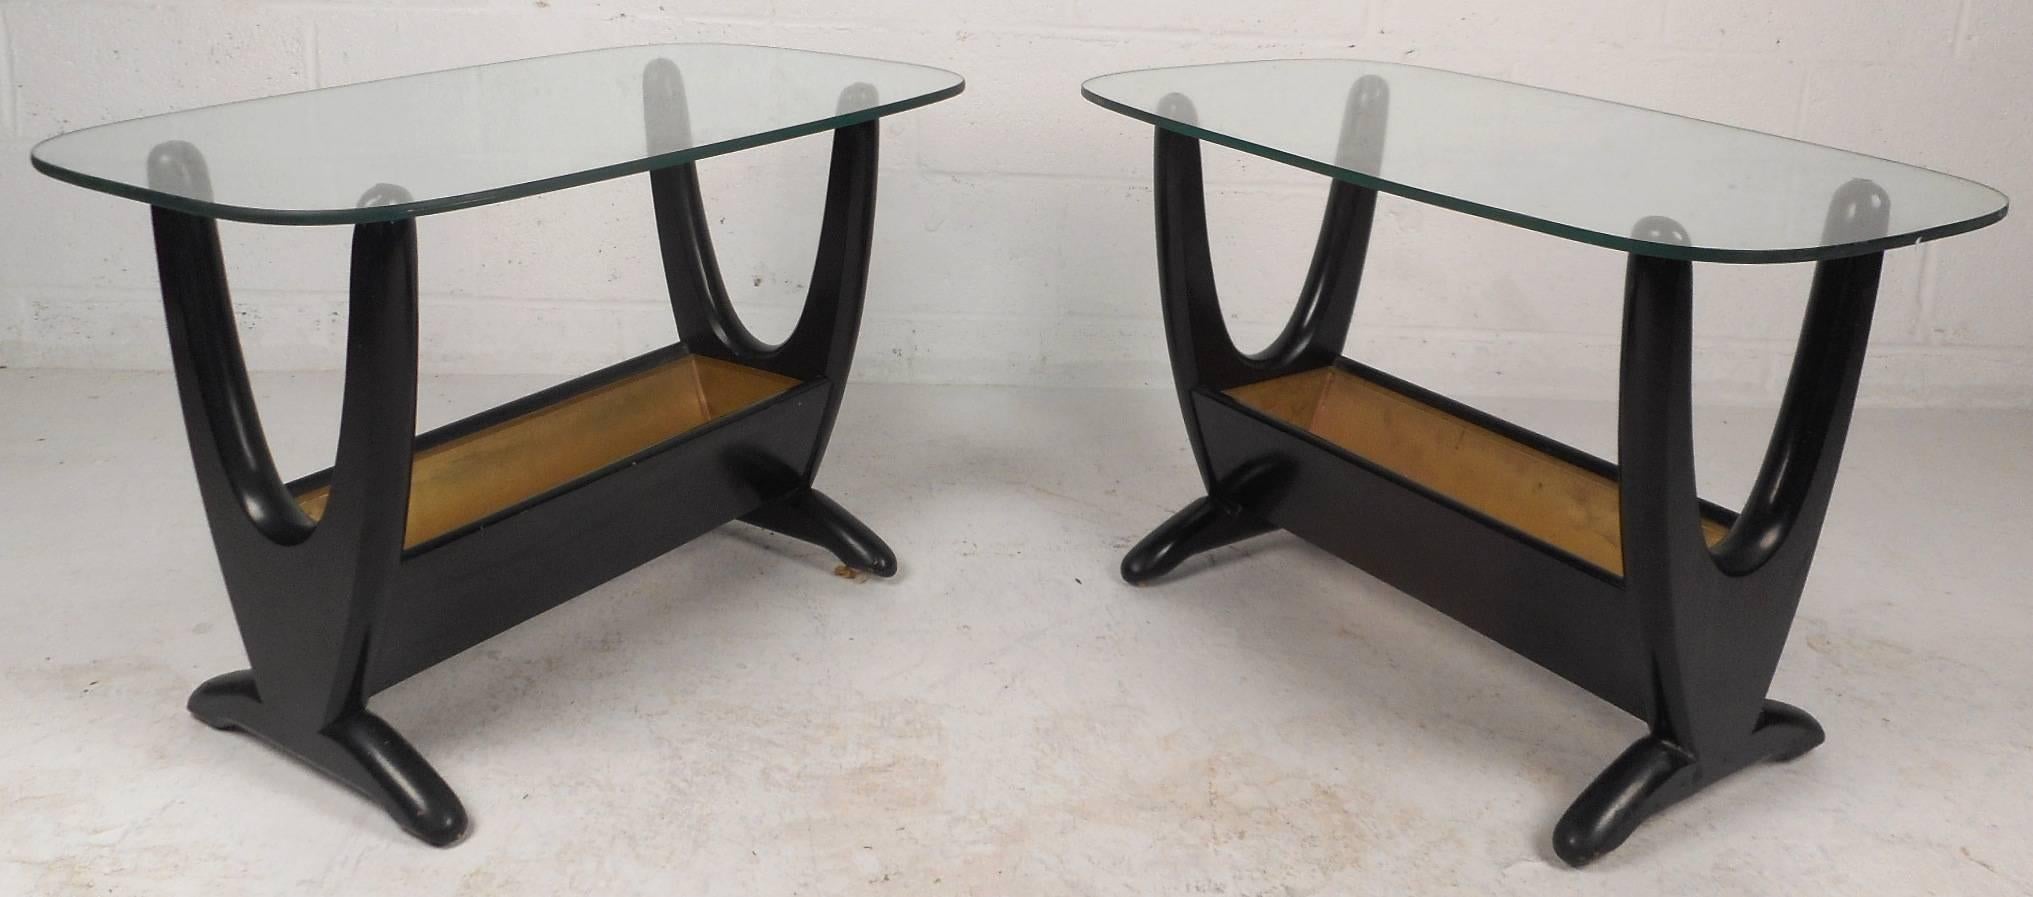 Beautiful set includes one coffee table and two end tables from the 